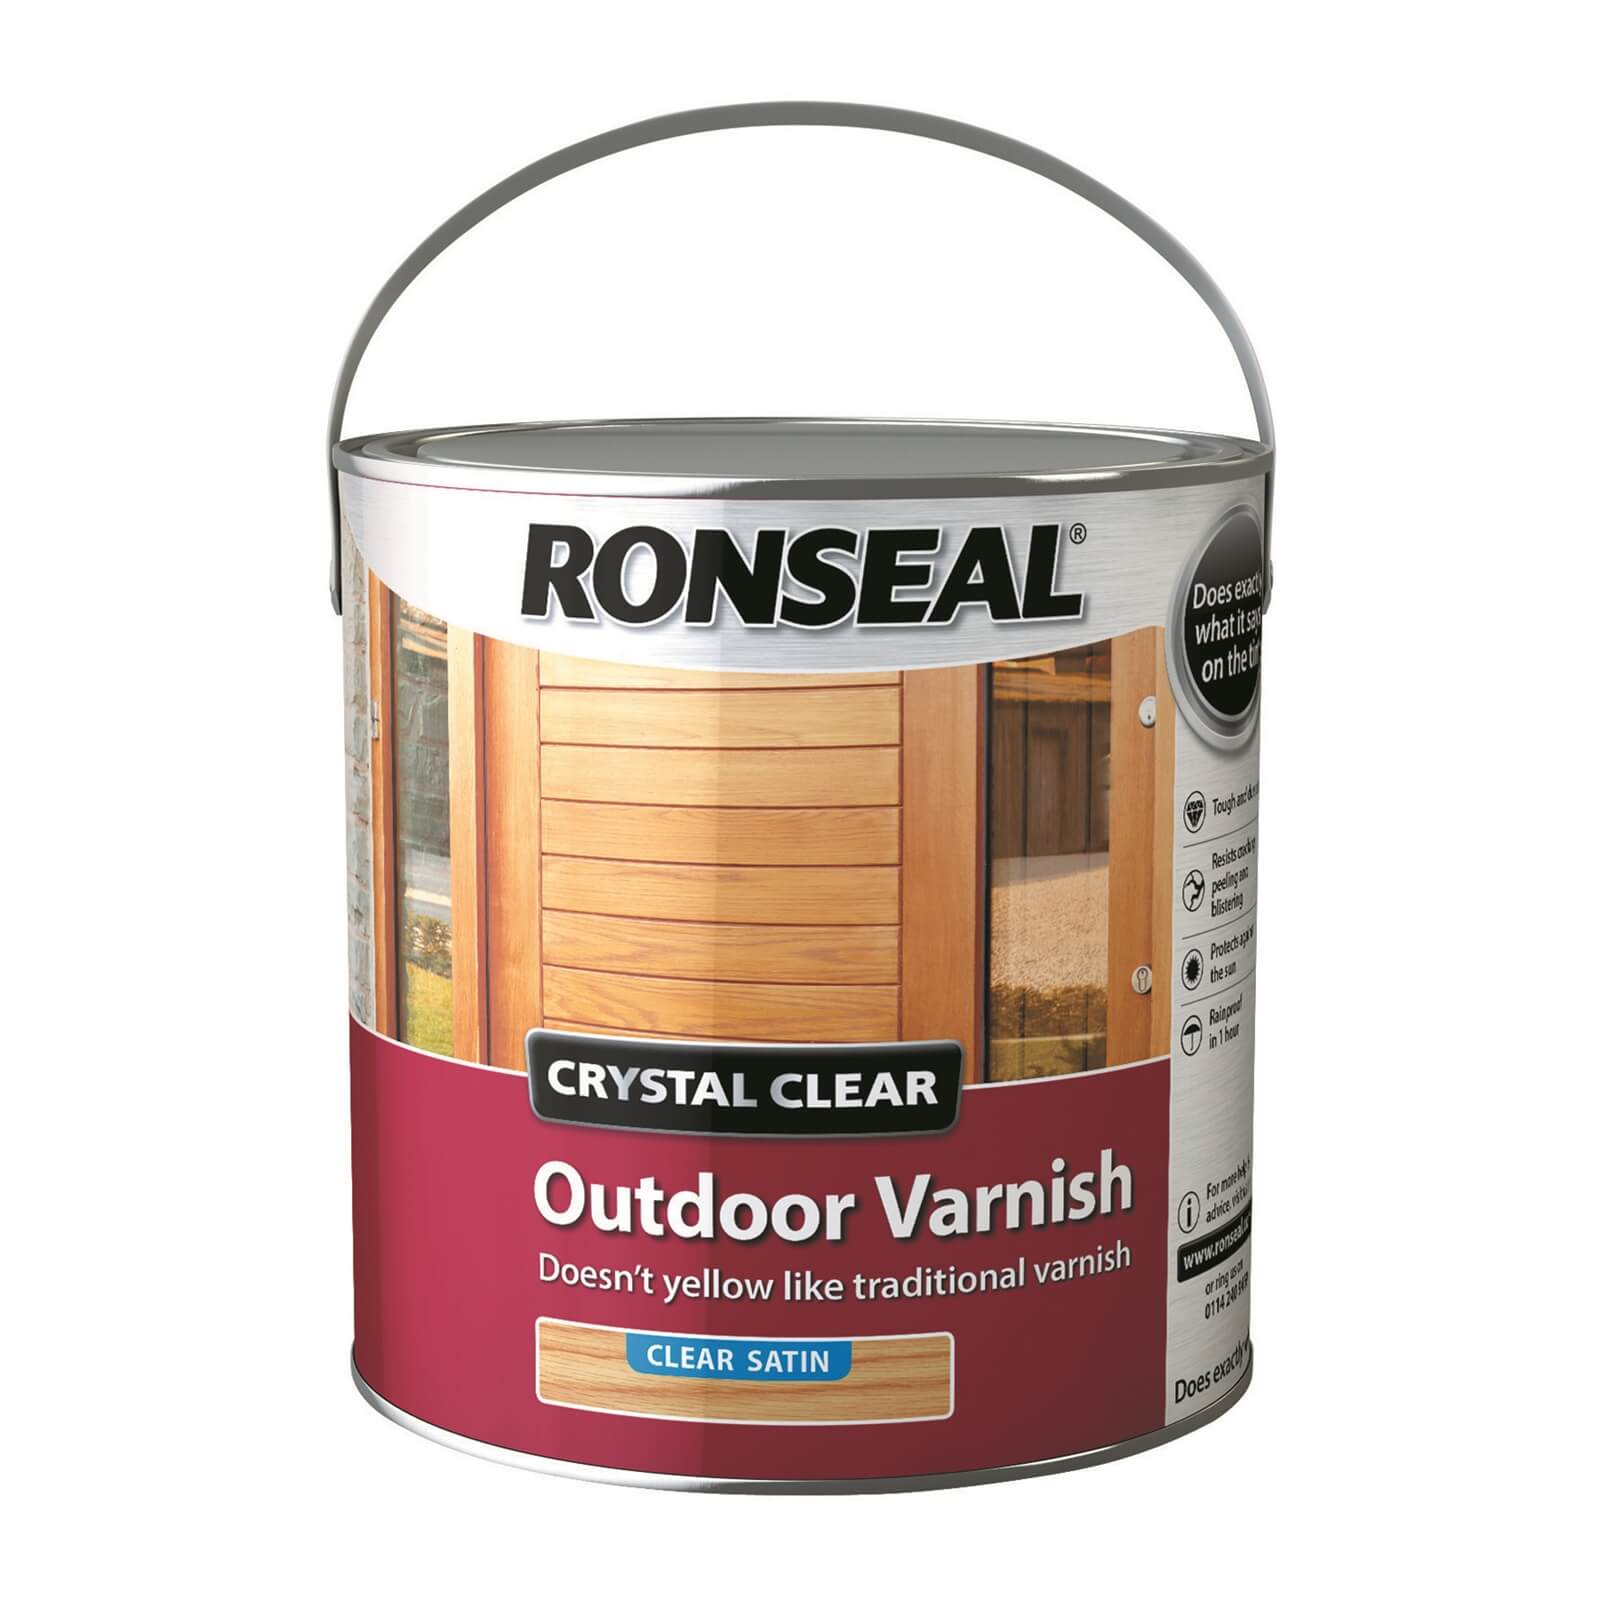 Ronseal Crystal Clear Outdoor Varnish Satin - 2.5L